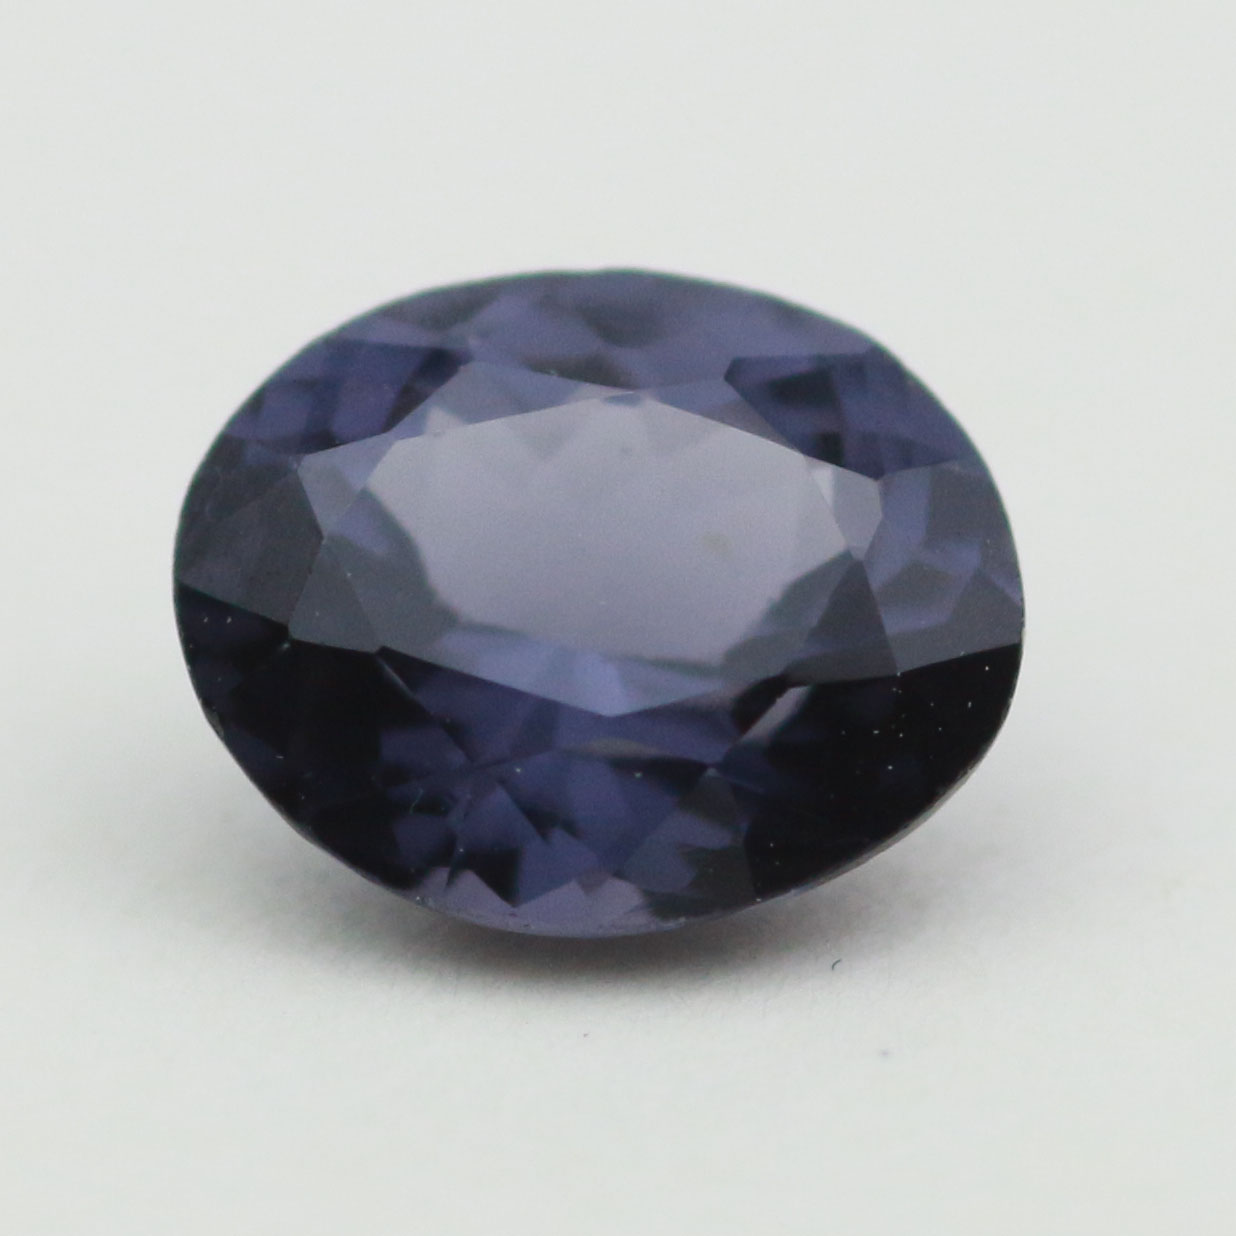 6.6X5.2 PURPLE SPINEL OVAL 0.87CT